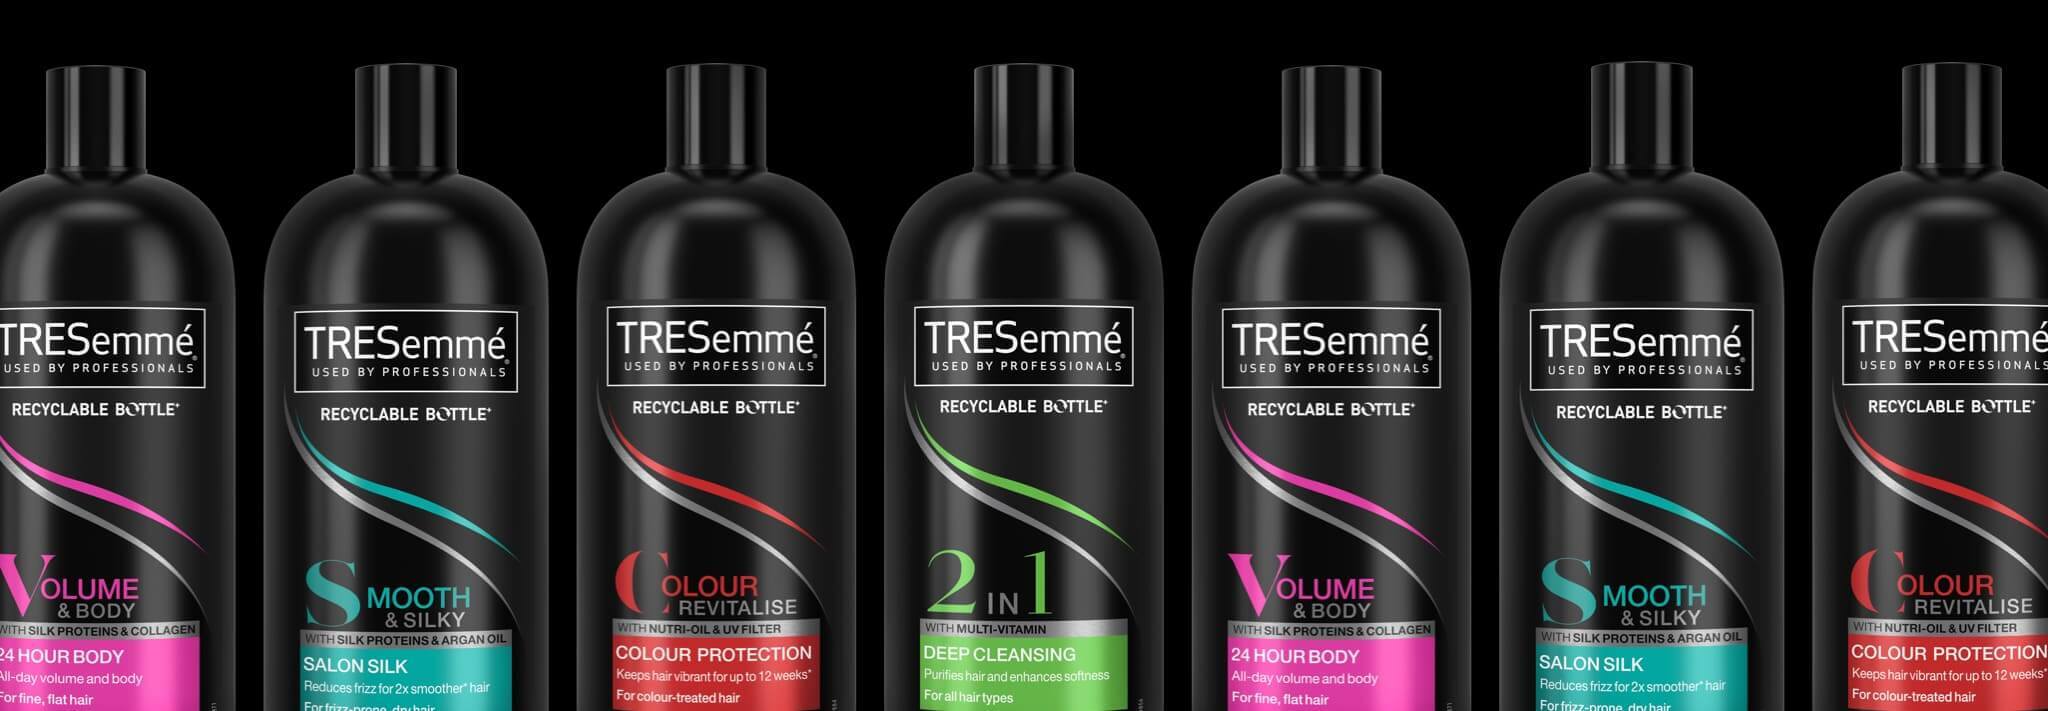 TRESemmé is leading the way on making black plastic recyclable